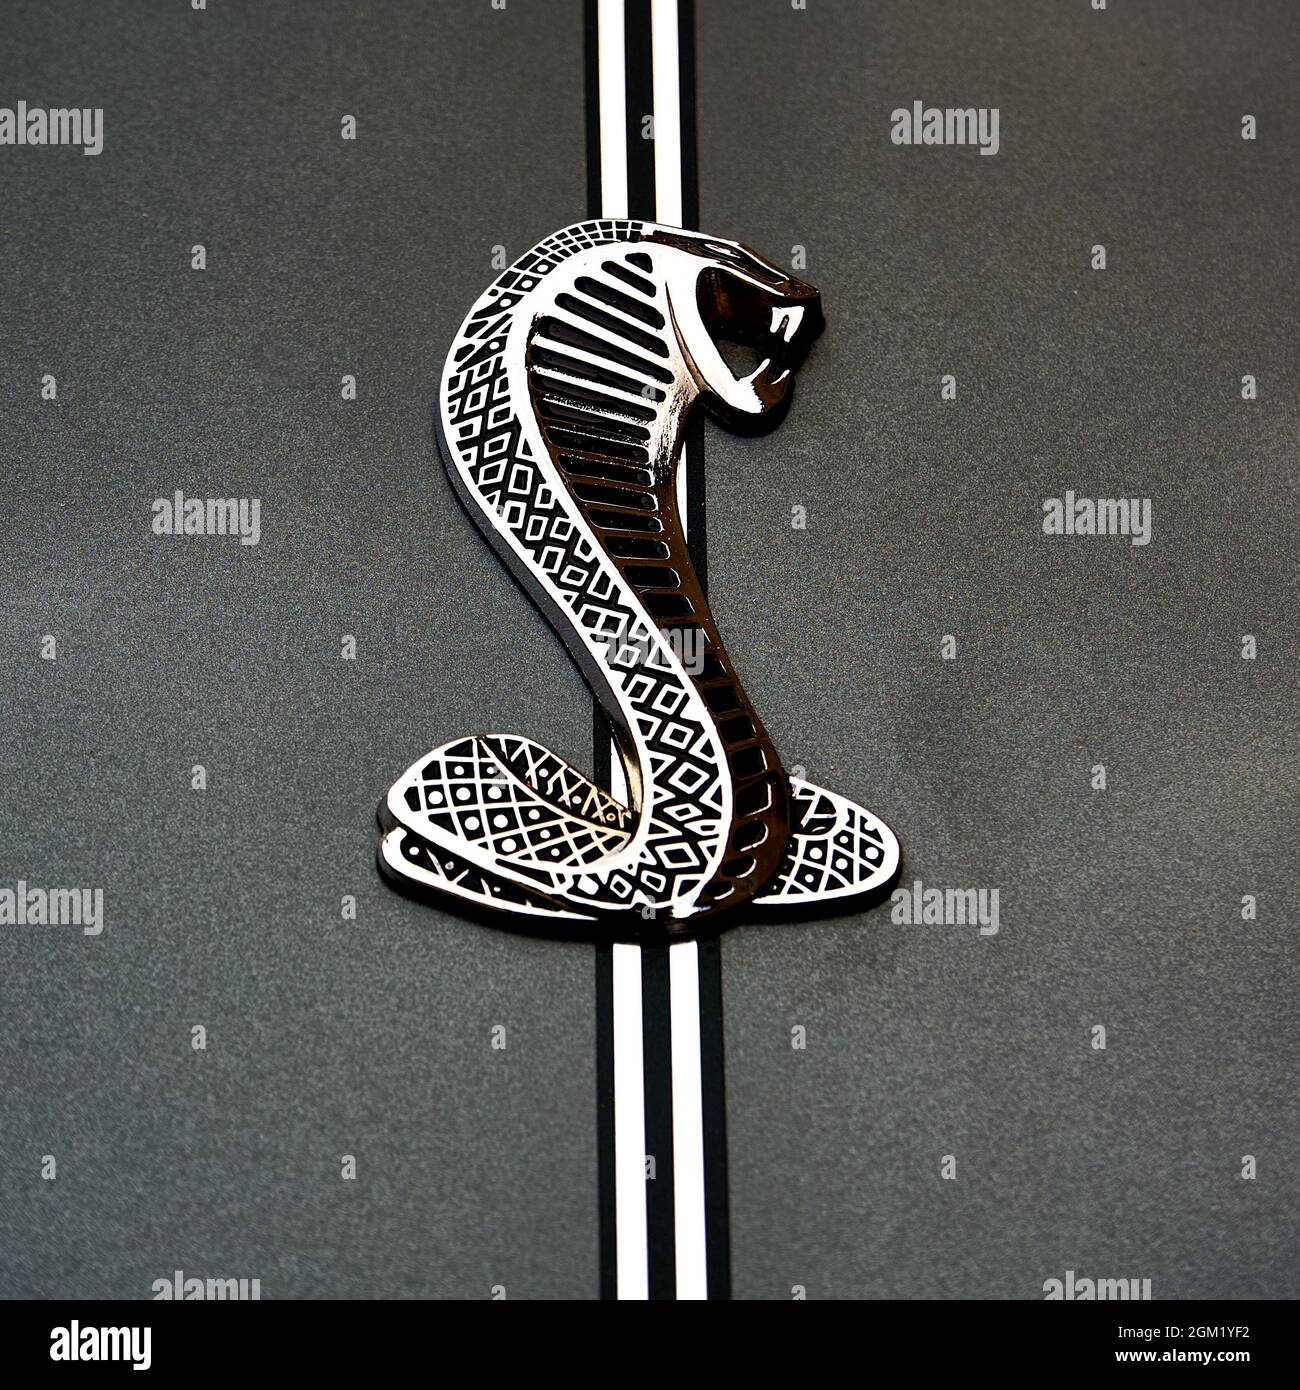 Ford Cobra logo of a snake raising its head to bite, emblem on the paint of the American sports car in Schöningen, Germany, September 12, 2021 Stock Photo